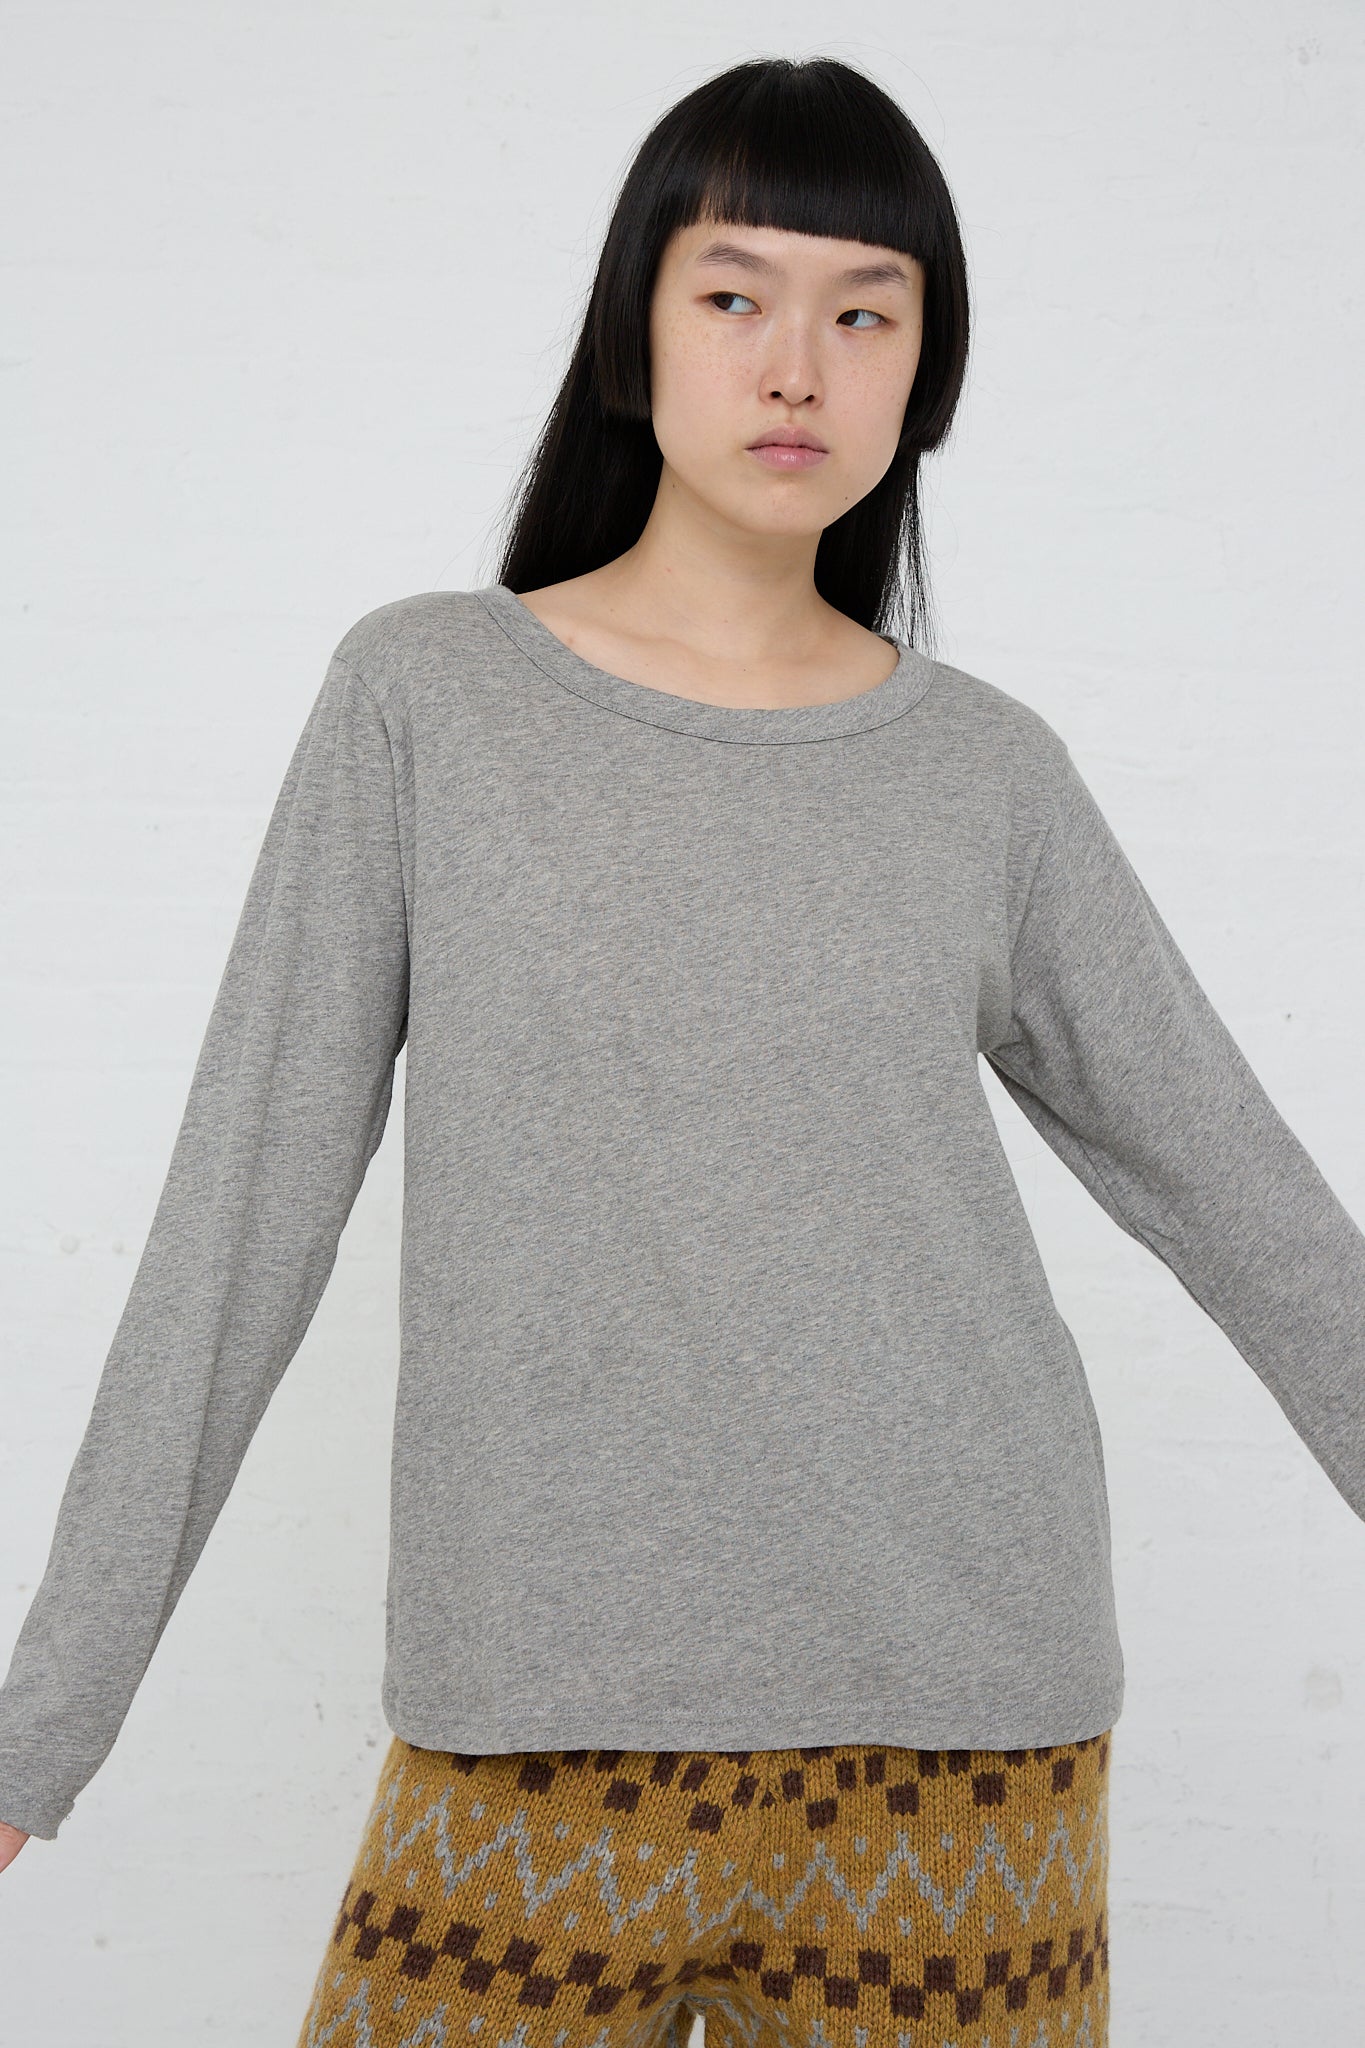 The model is wearing an Ichi Cotton Knit Pullover in Gray - OROBORO STORE